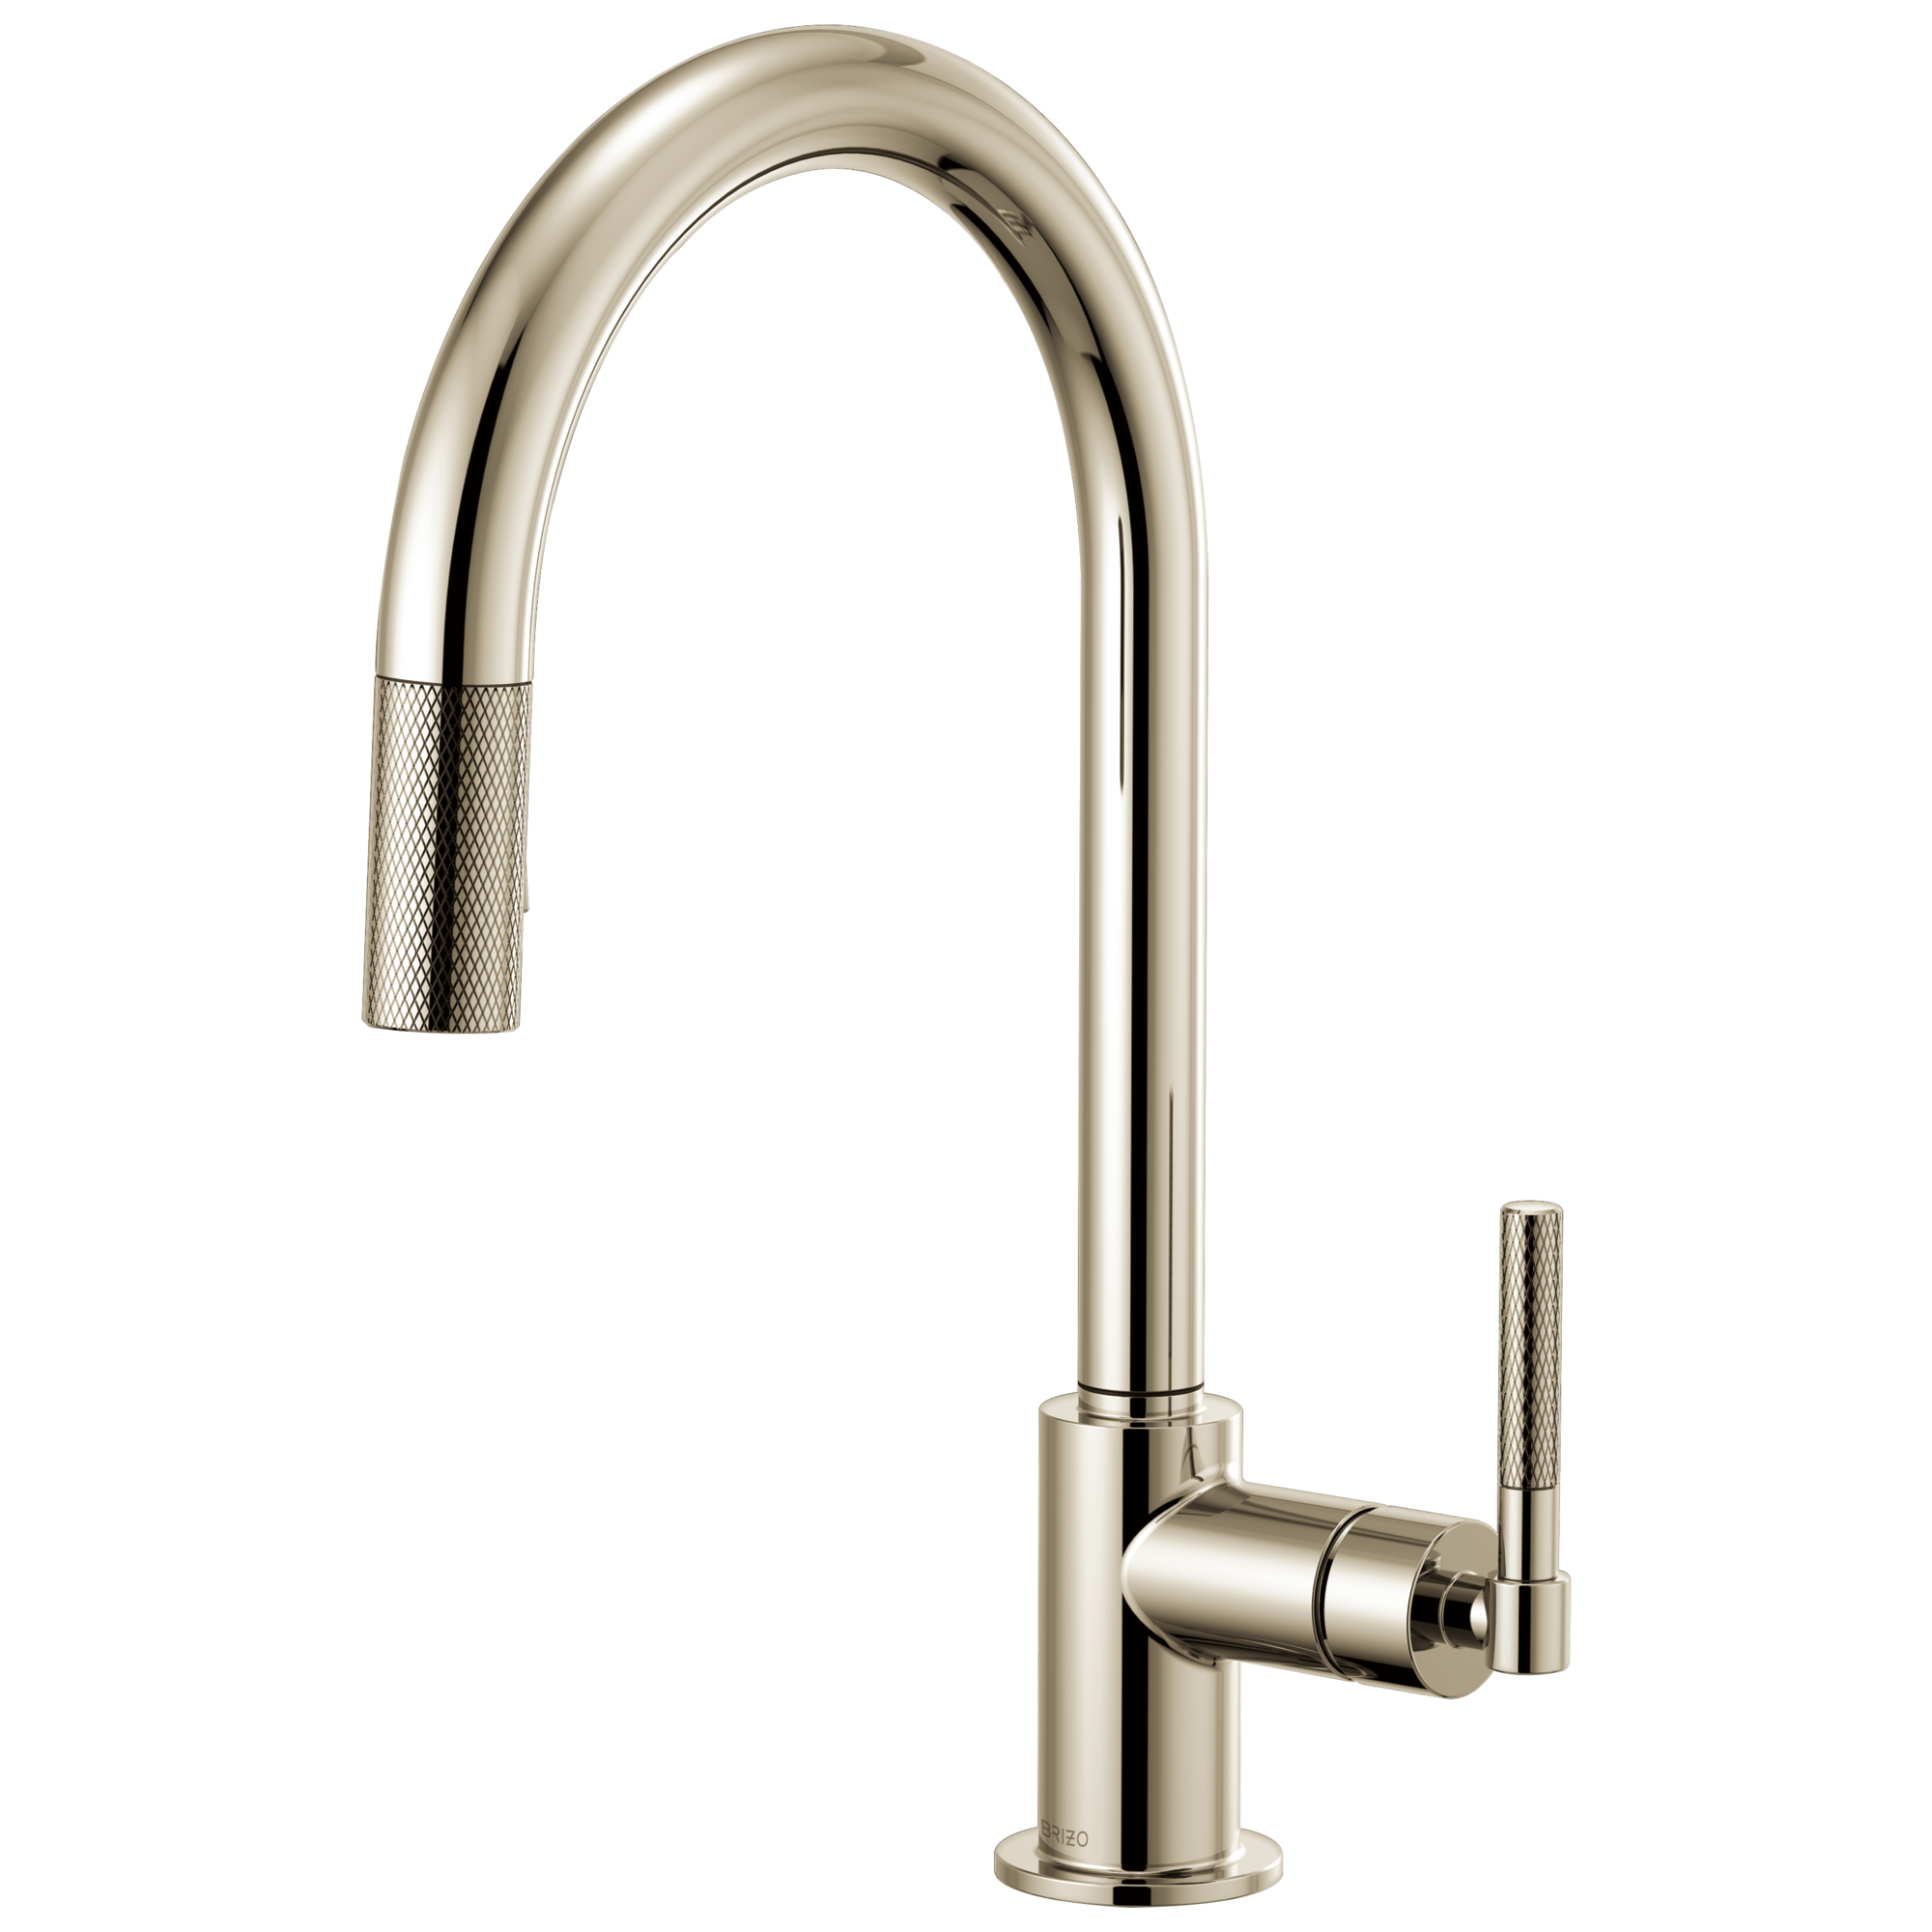 Brizo Litze: Pull-Down Faucet with Arc Spout and Knurled Handle